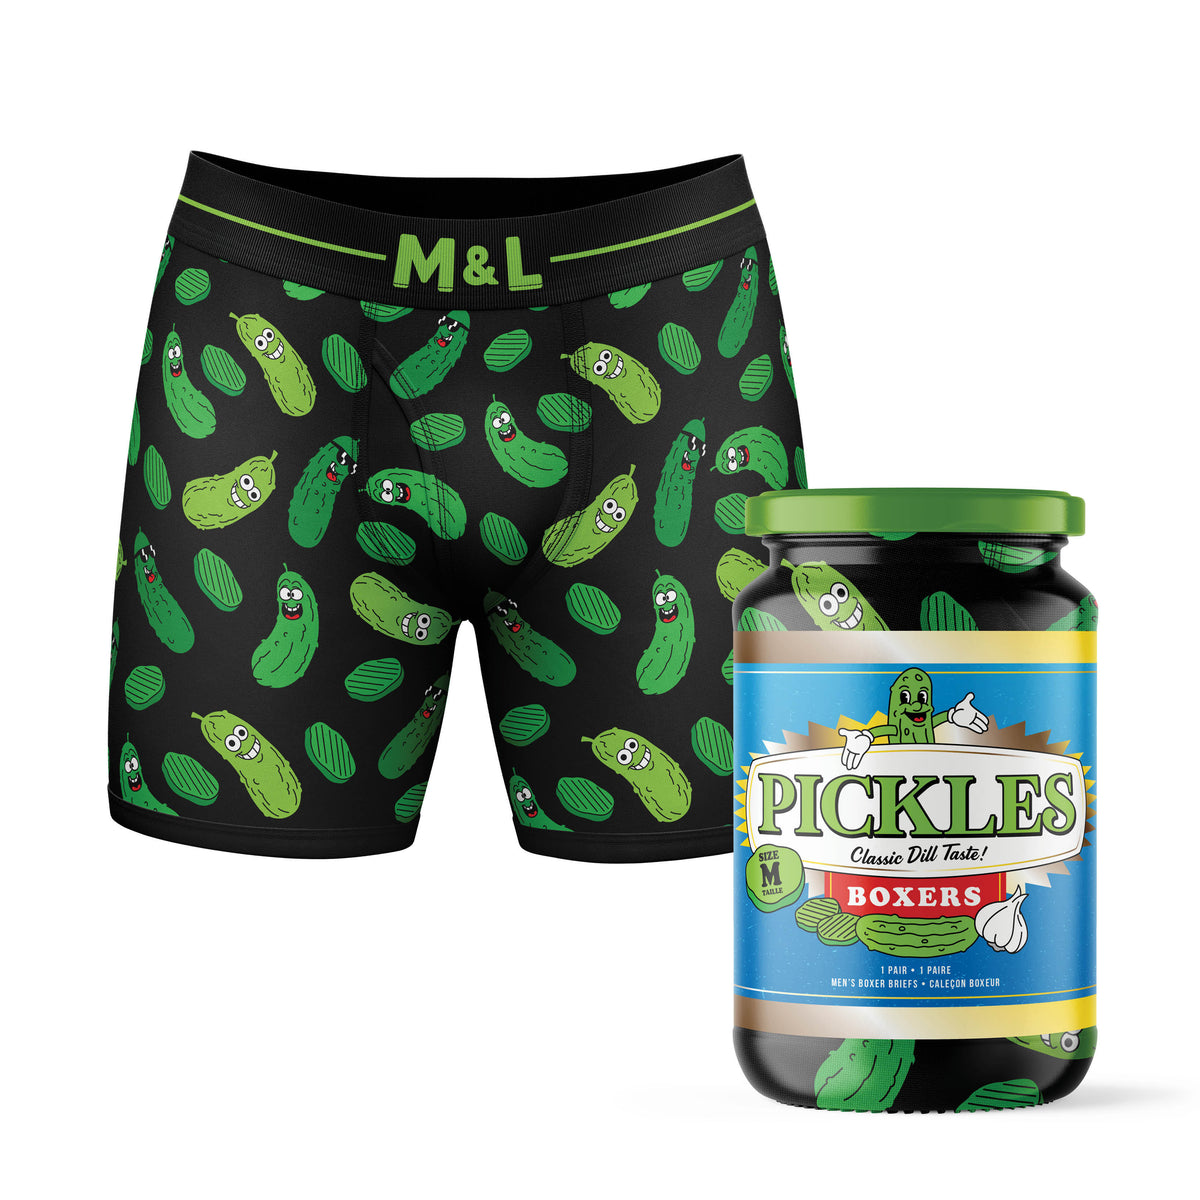 Pickles Boxers